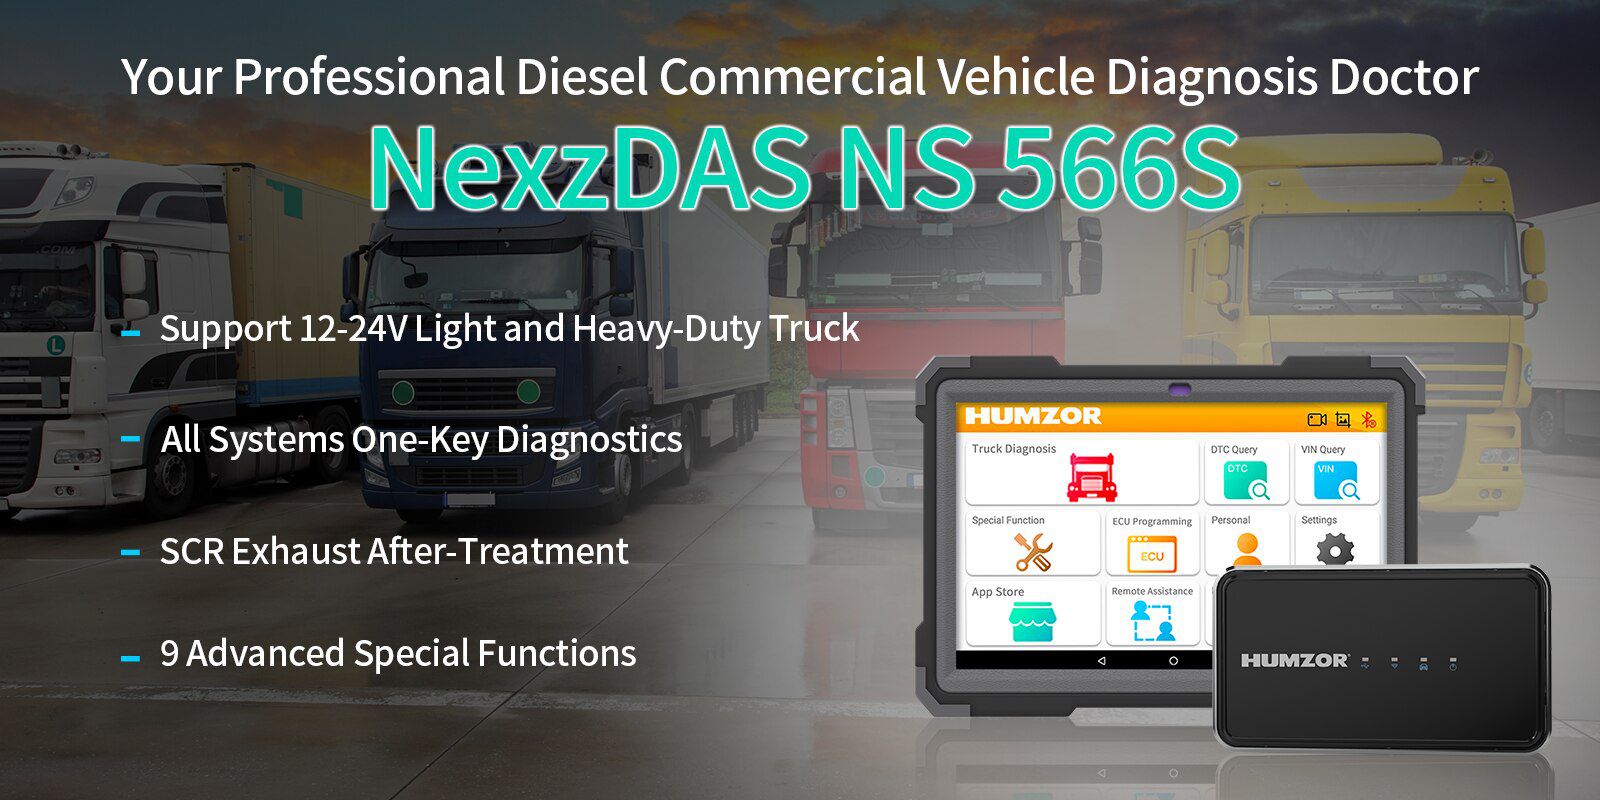 Humzor ns566s Heavy Duty Truck Diesel full System Diagnosis Tool OBD2 Professional scanner 9 Reset ABS / DPF / Mile Adjustment